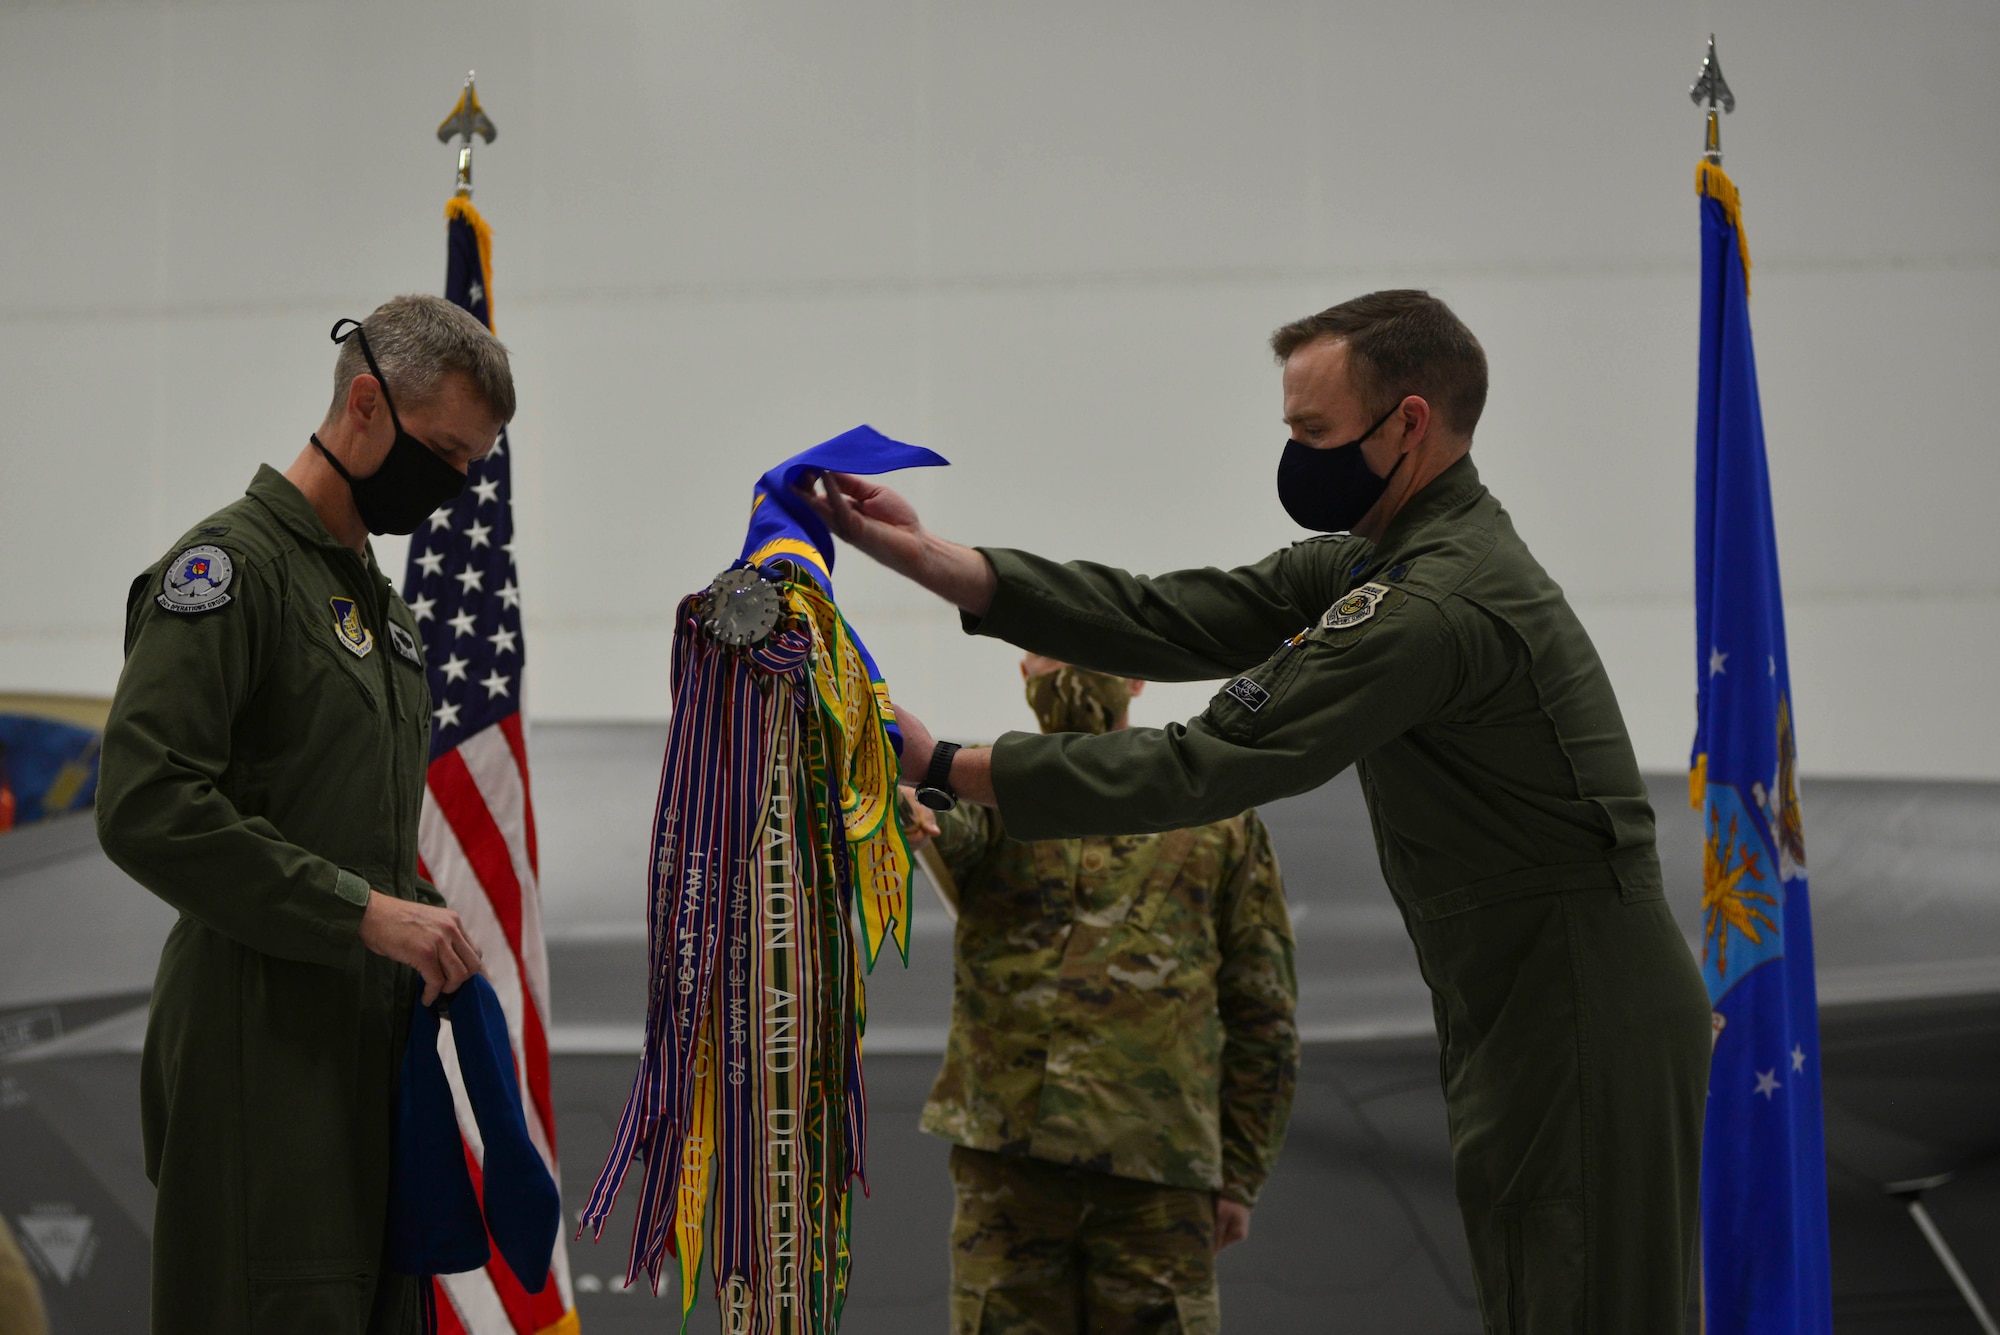 U.S. Air Force Lt. Col. Samuel Chipman unveils the 355th Fighter Squadron guidon during a reactivation ceremony at Eielson Air Force Base, Alaska, Dec. 18, 2020.